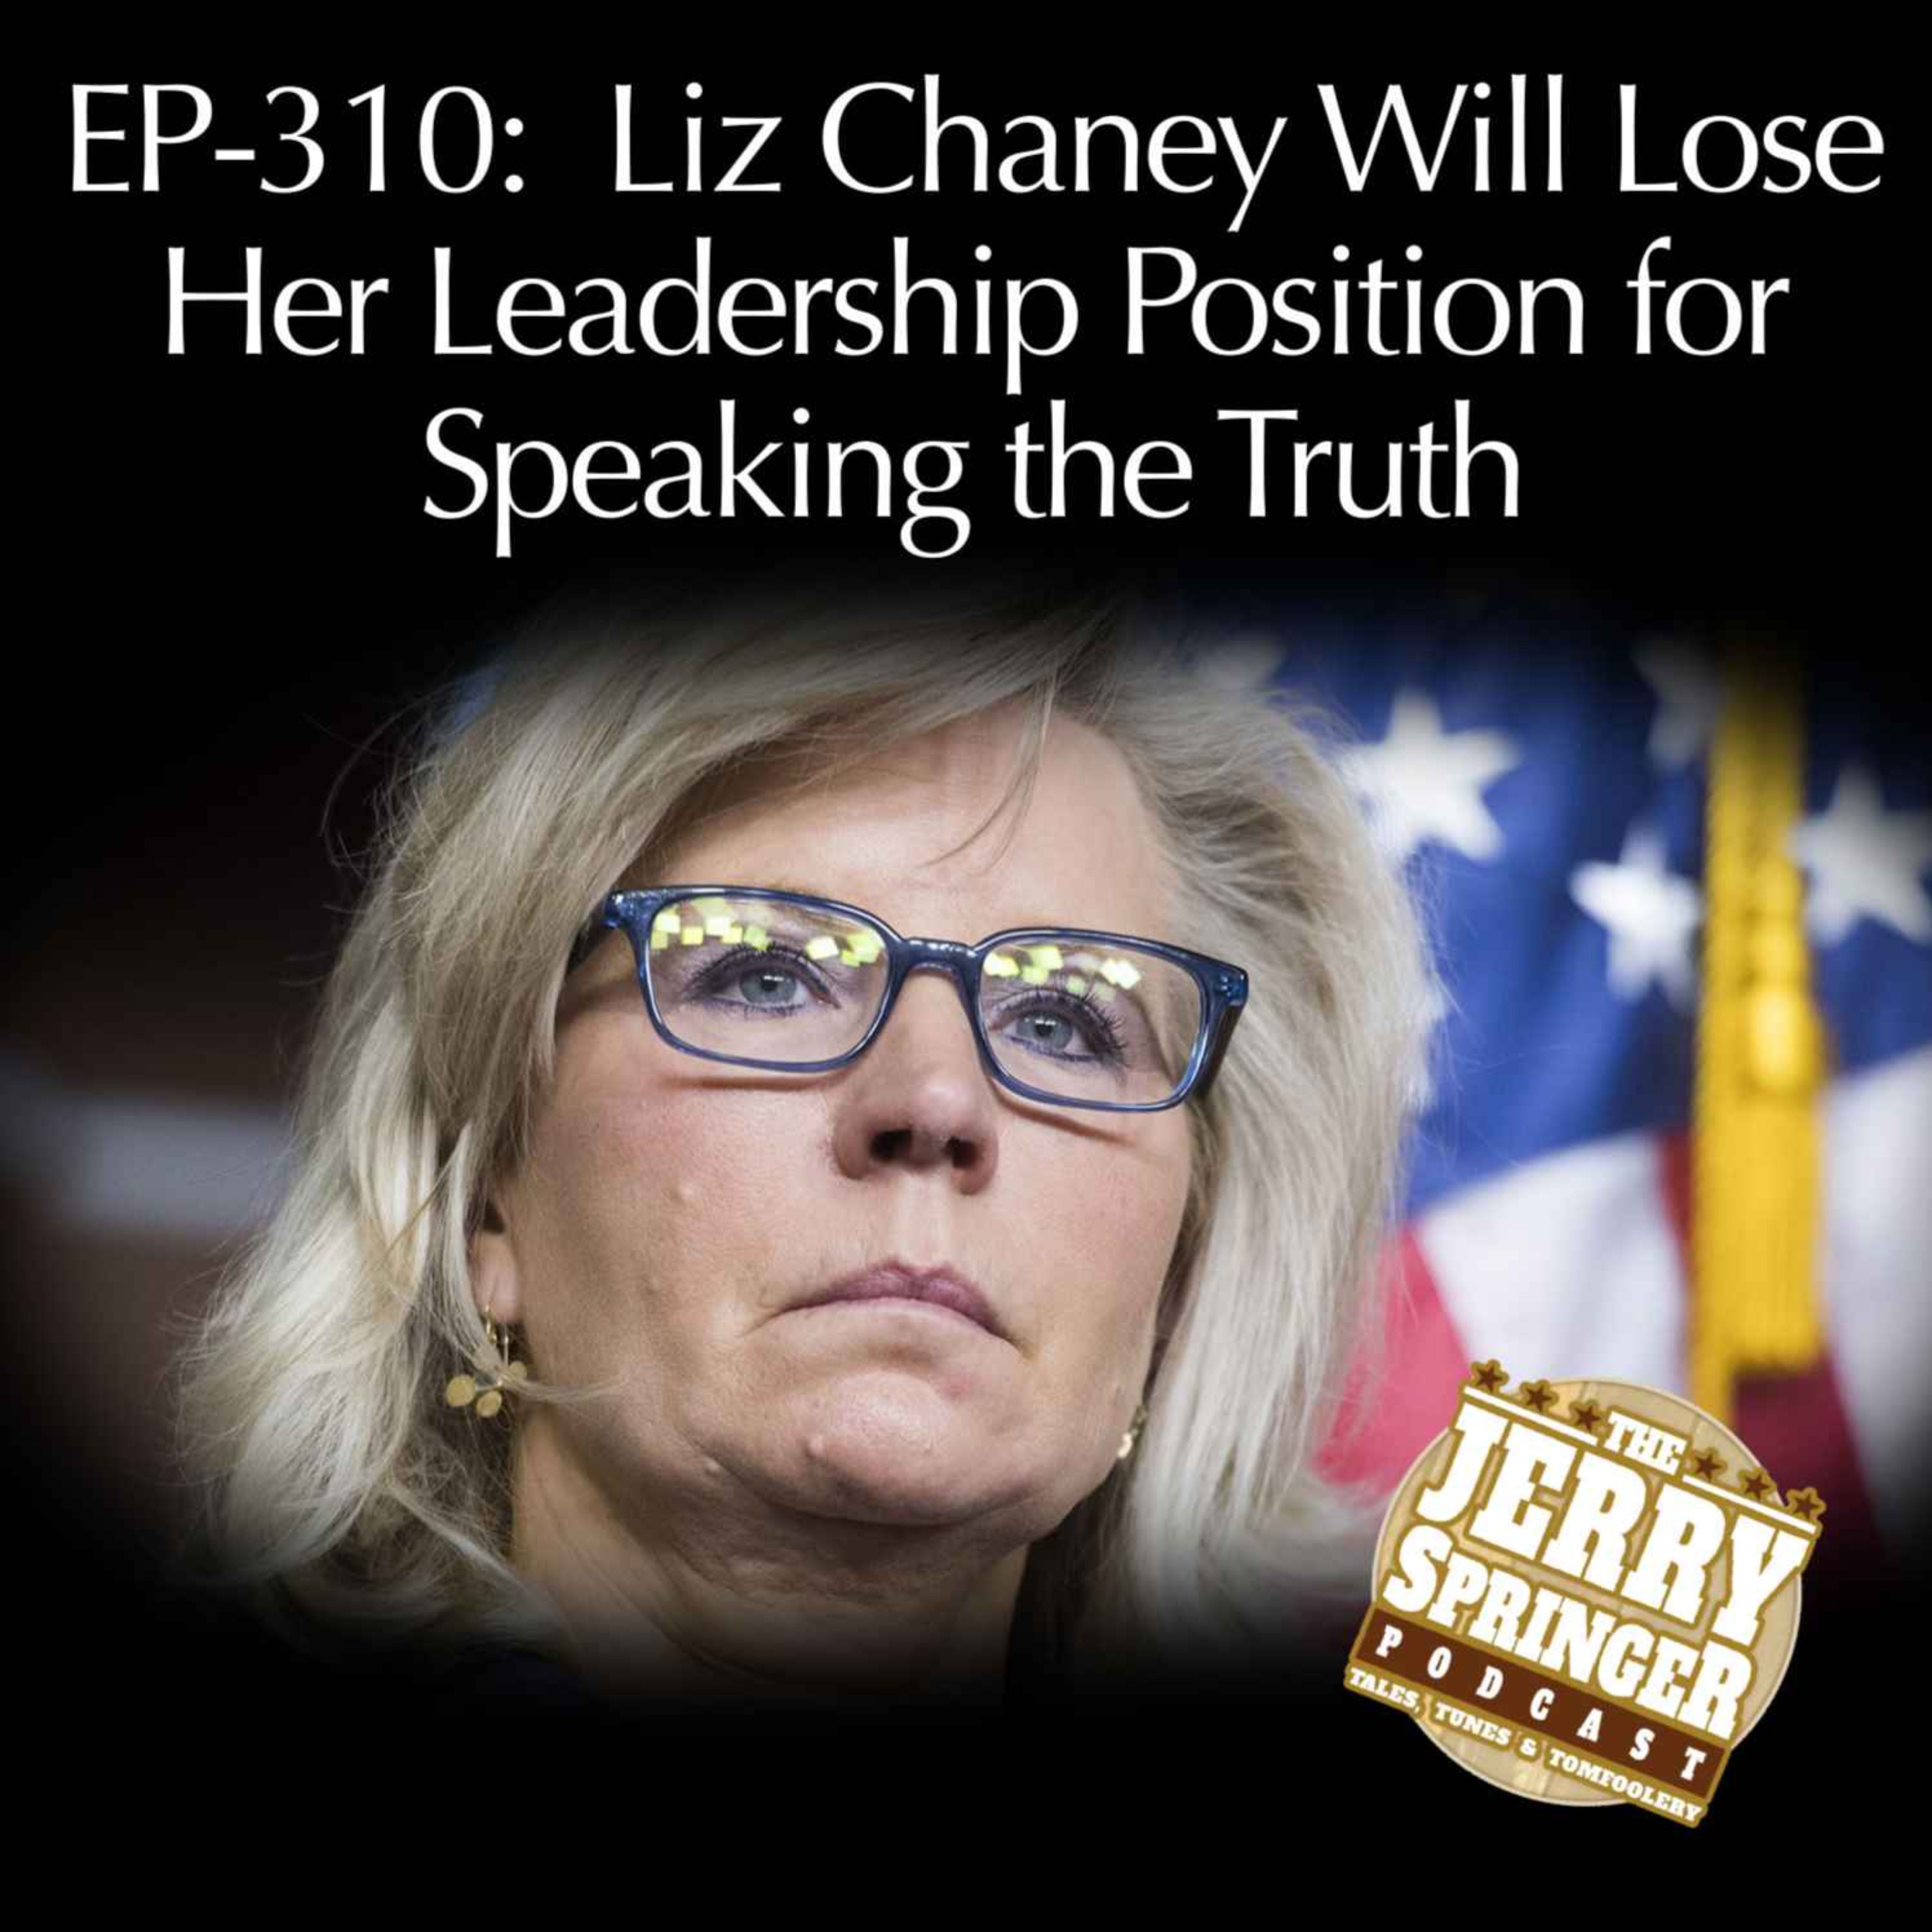 Liz Chaney Will Lose Her Leadership Position for Speaking the Truth: EP-310